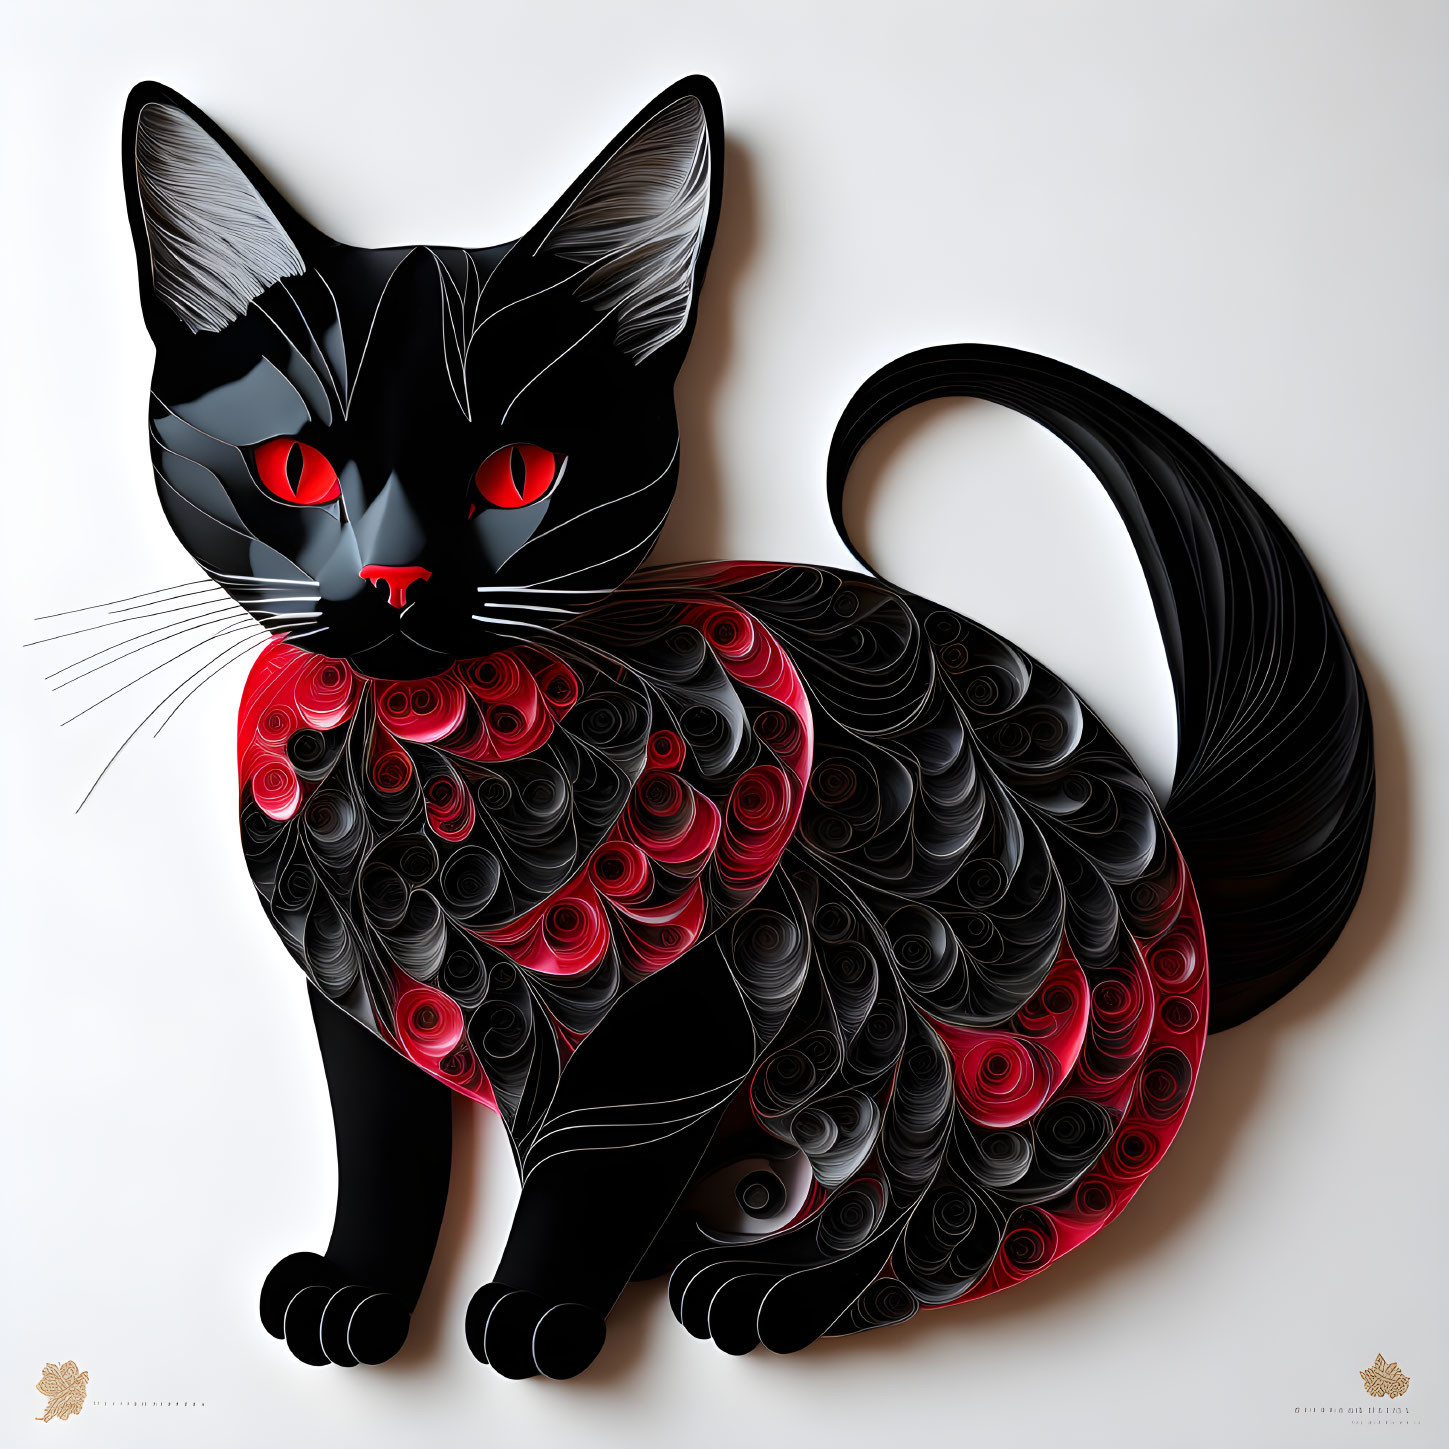 Stylized black cat with red and black patterns and red eyes